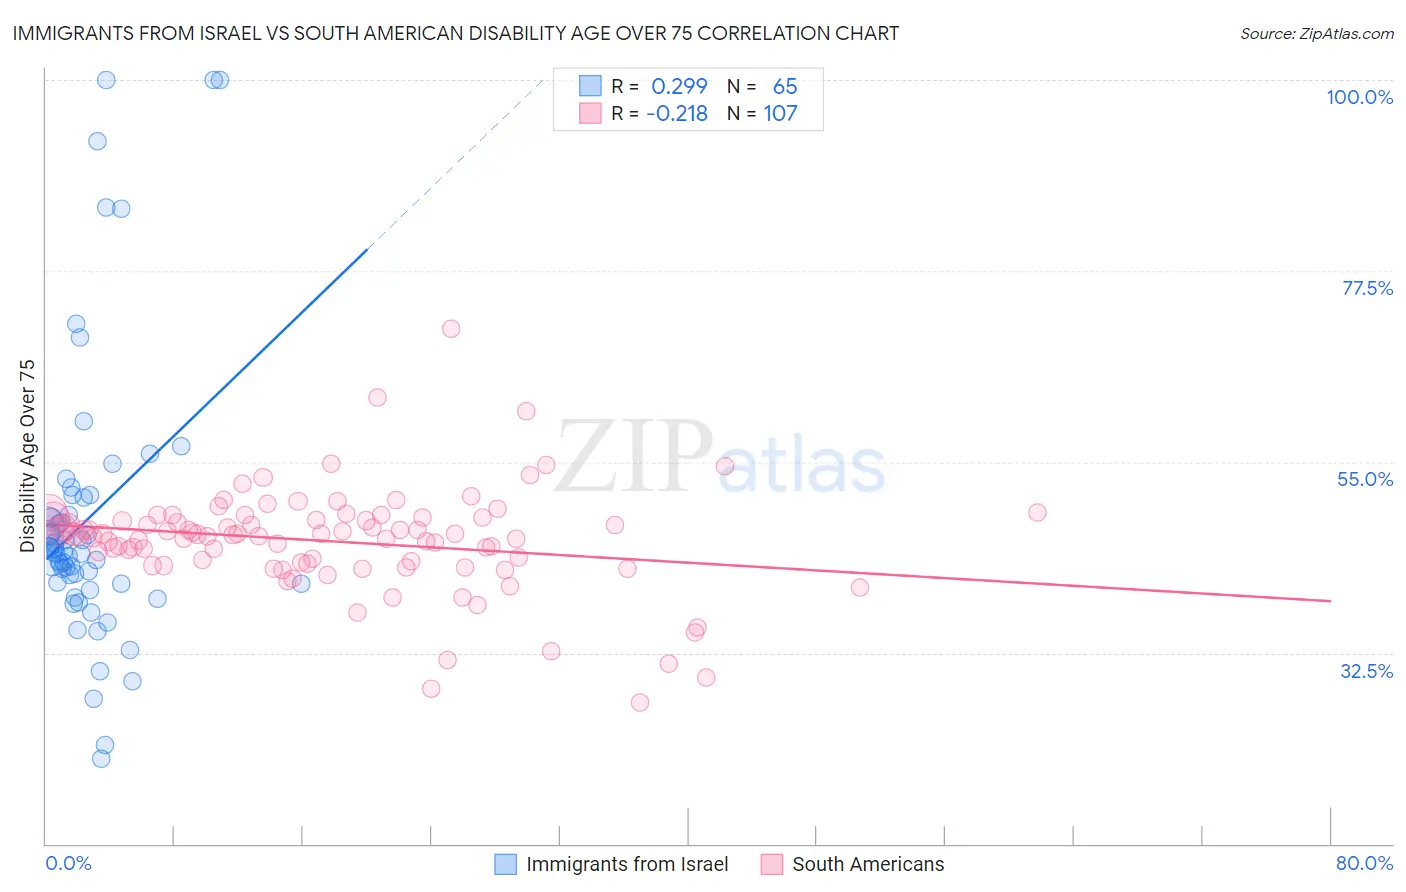 Immigrants from Israel vs South American Disability Age Over 75